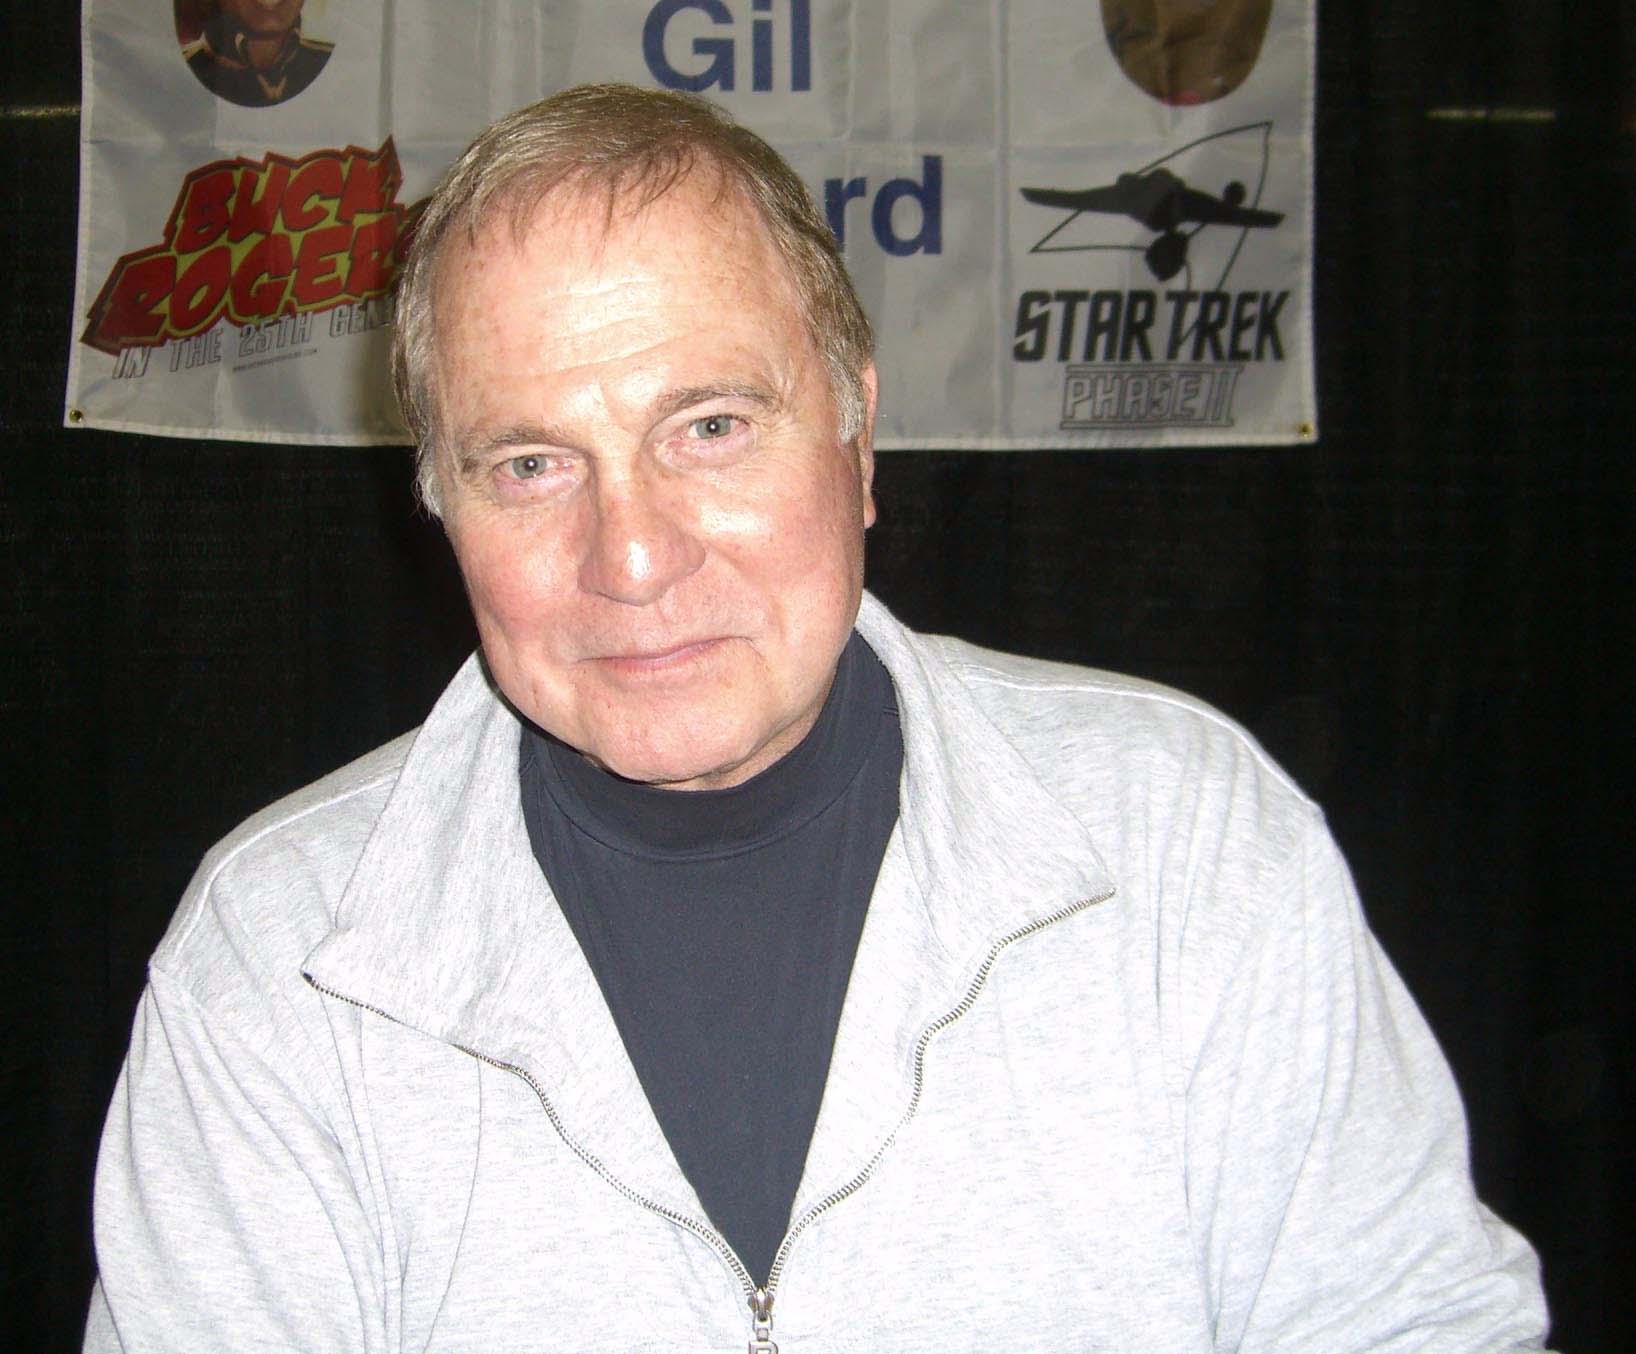 gil-gerard-pictures